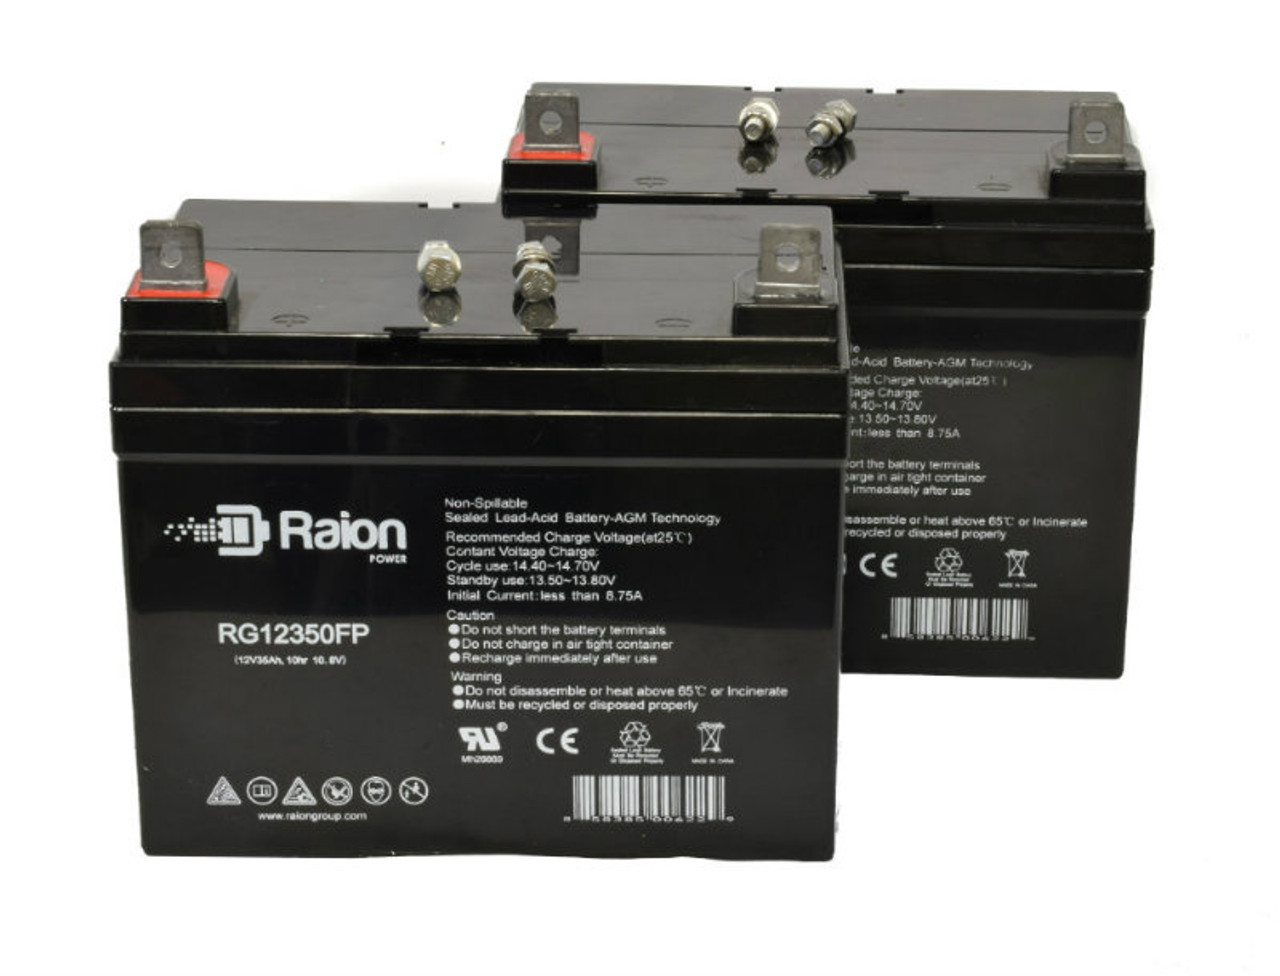 Raion Power Replacement 12V 35Ah Lawn Mower Battery for Sears 520.25538 (Through 1966) - 2 Pack